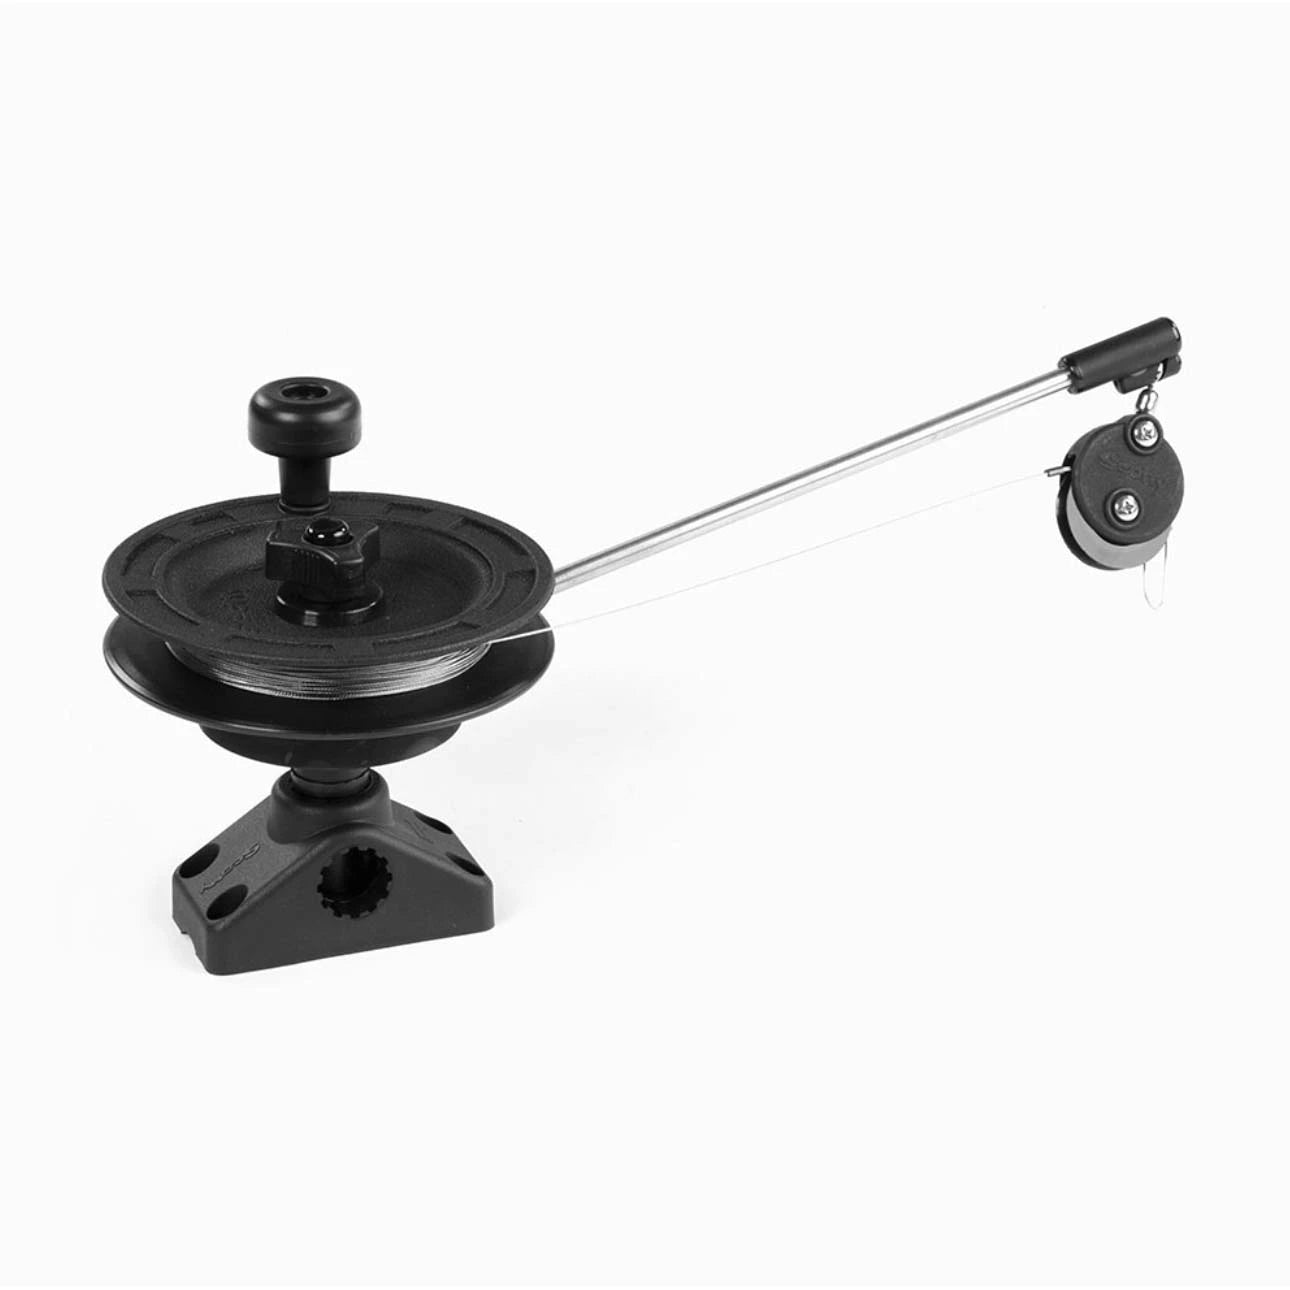 Scotty 1073 Laketroller Downrigger with Bracket Mount-Downriggers & Accessories-Scotty-Fishing Station